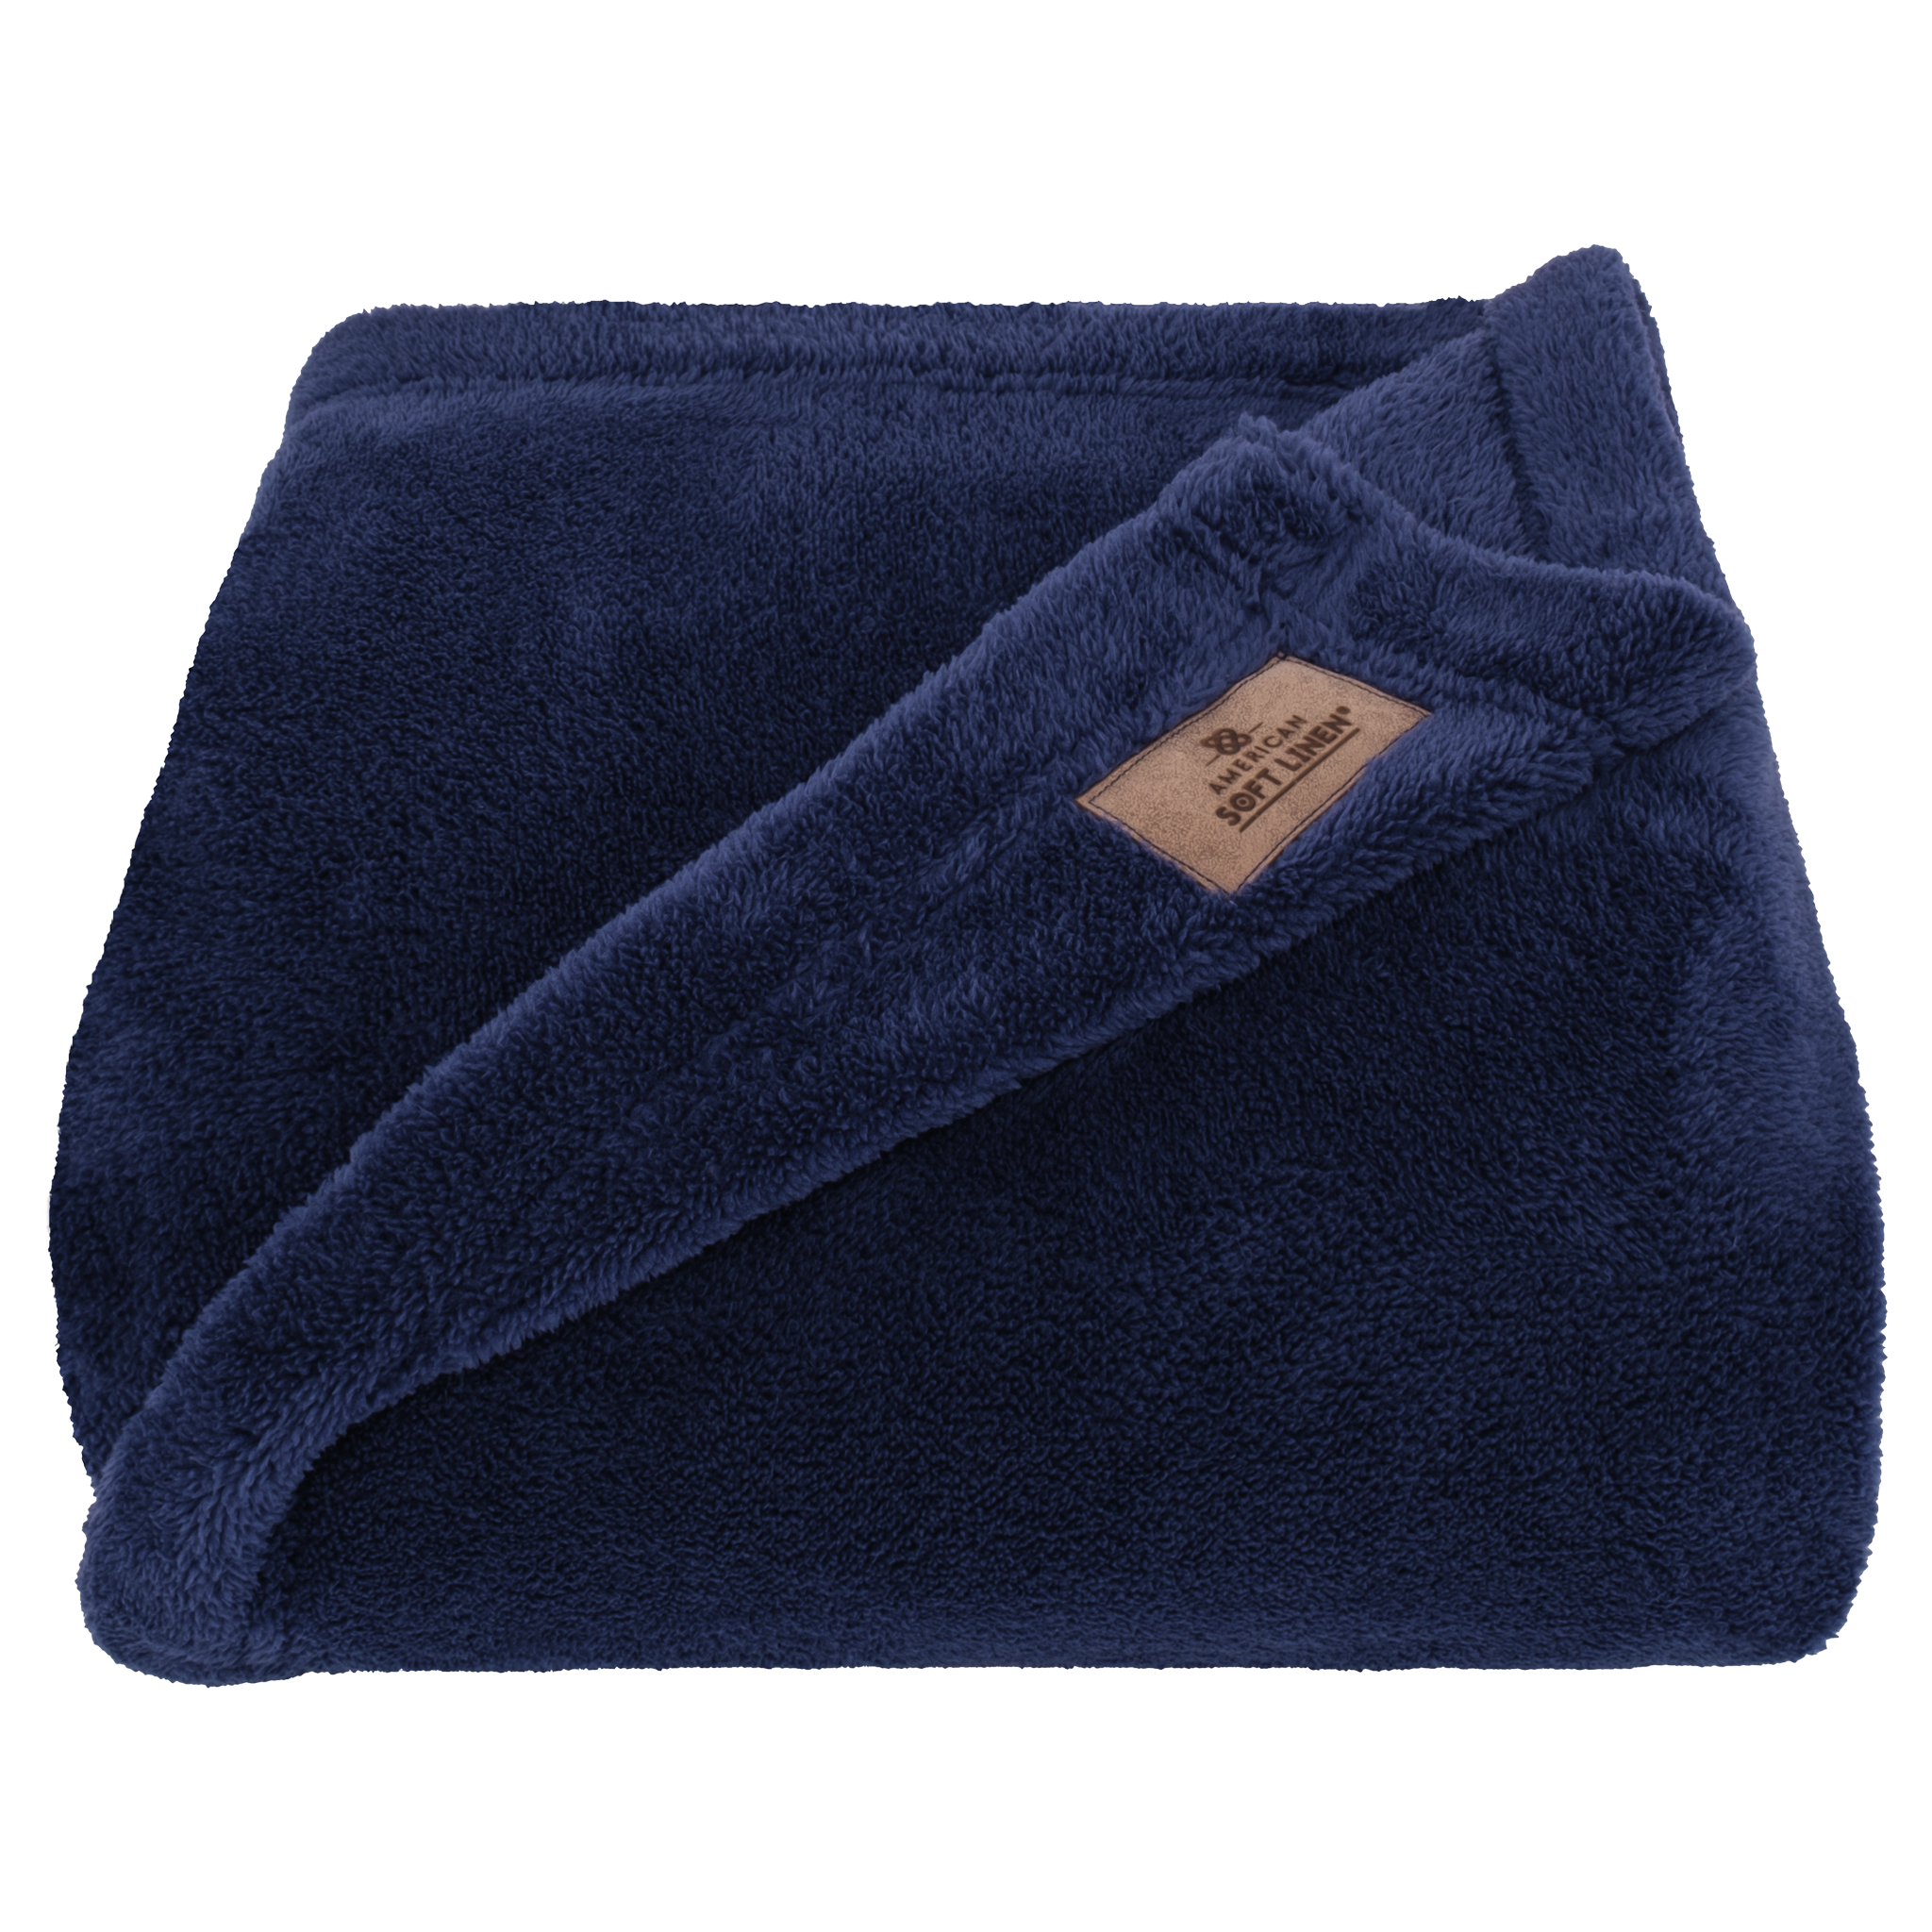 American Soft Linen - Bedding Fleece Blanket - Twin Size 60x80 inches - Navy-Blue - 3